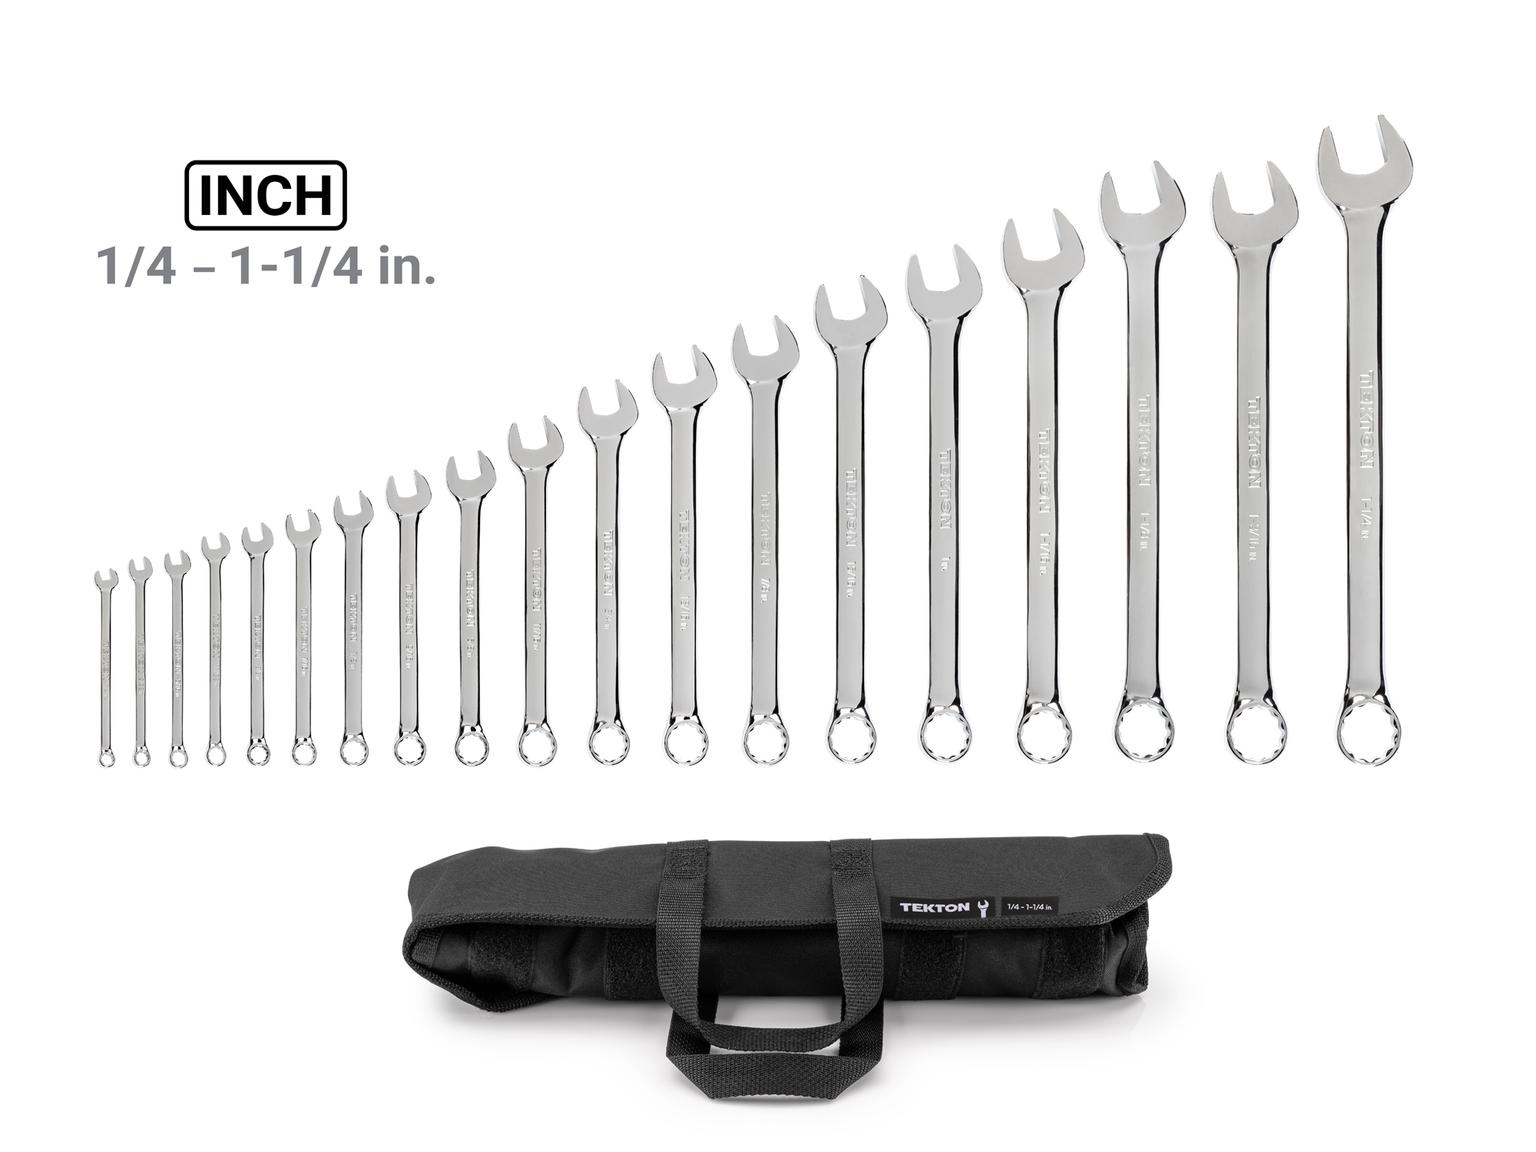 TEKTON WCB94103-T Combination Wrench Set with Pouch, 19-Piece (1/4 - 1-1/4 in.)